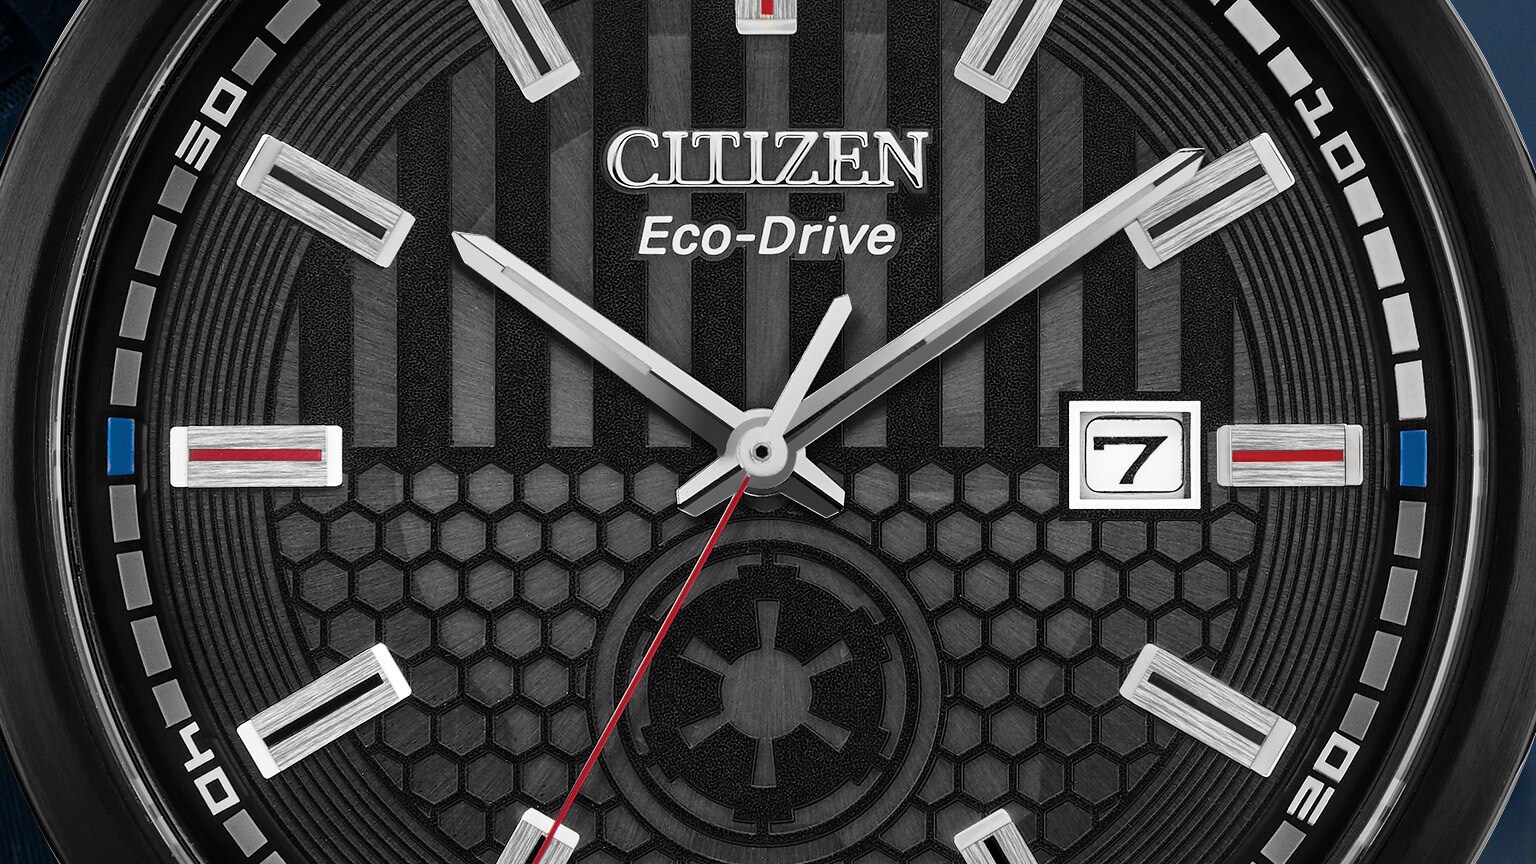 How the New Citizen Star Wars Watches Became Fully Operational - Exclusive